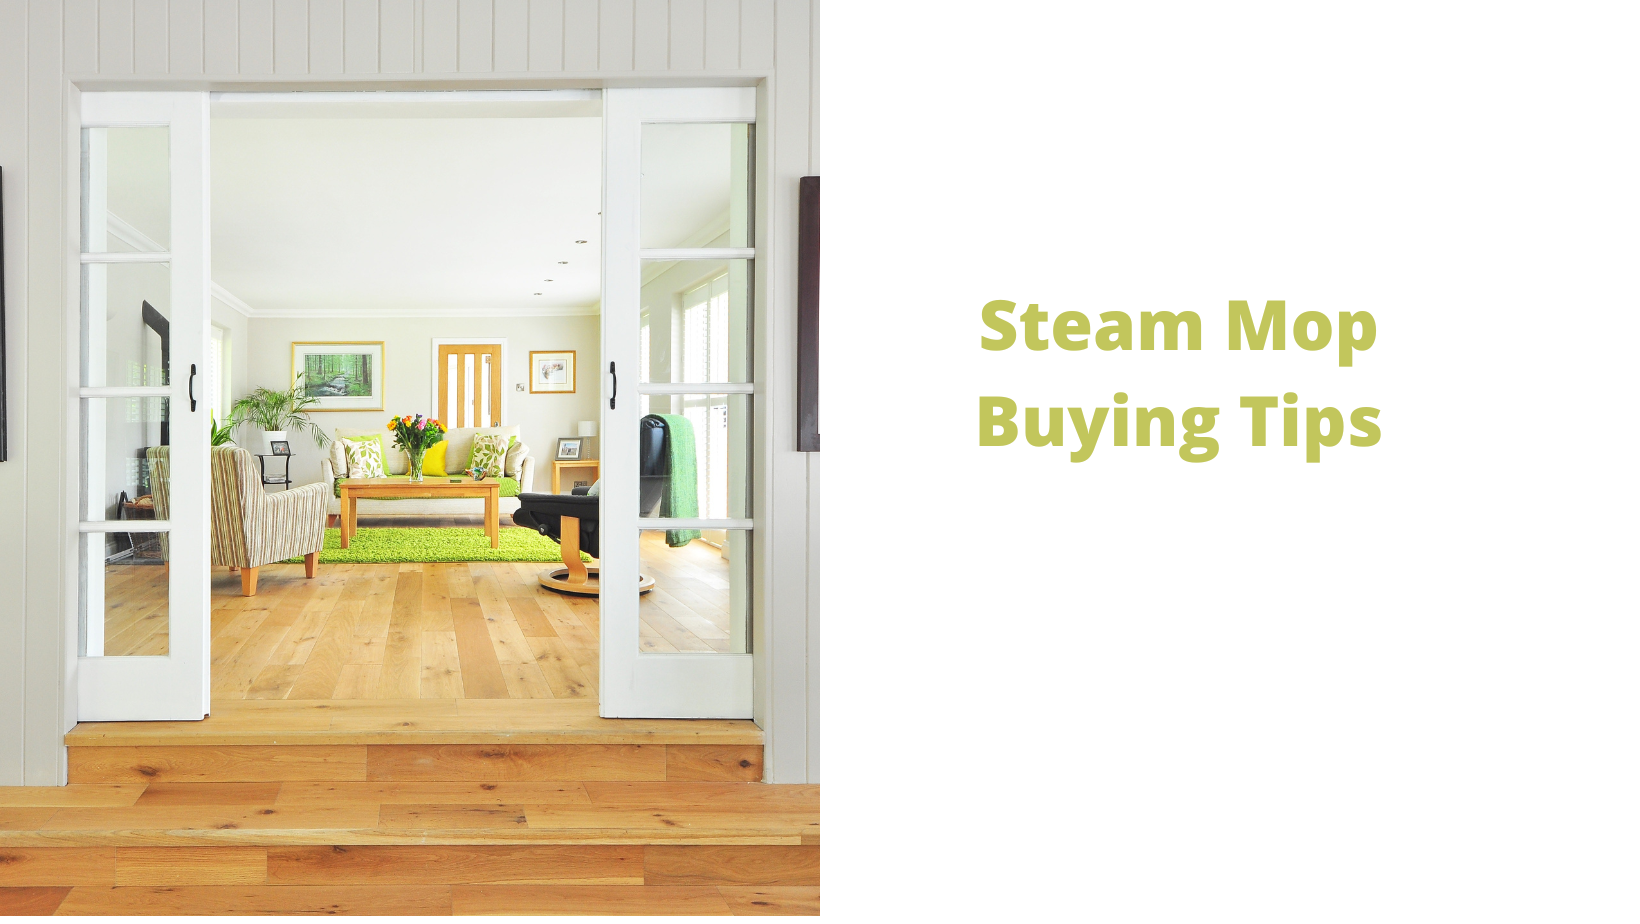 Steam Mop Buying Tips